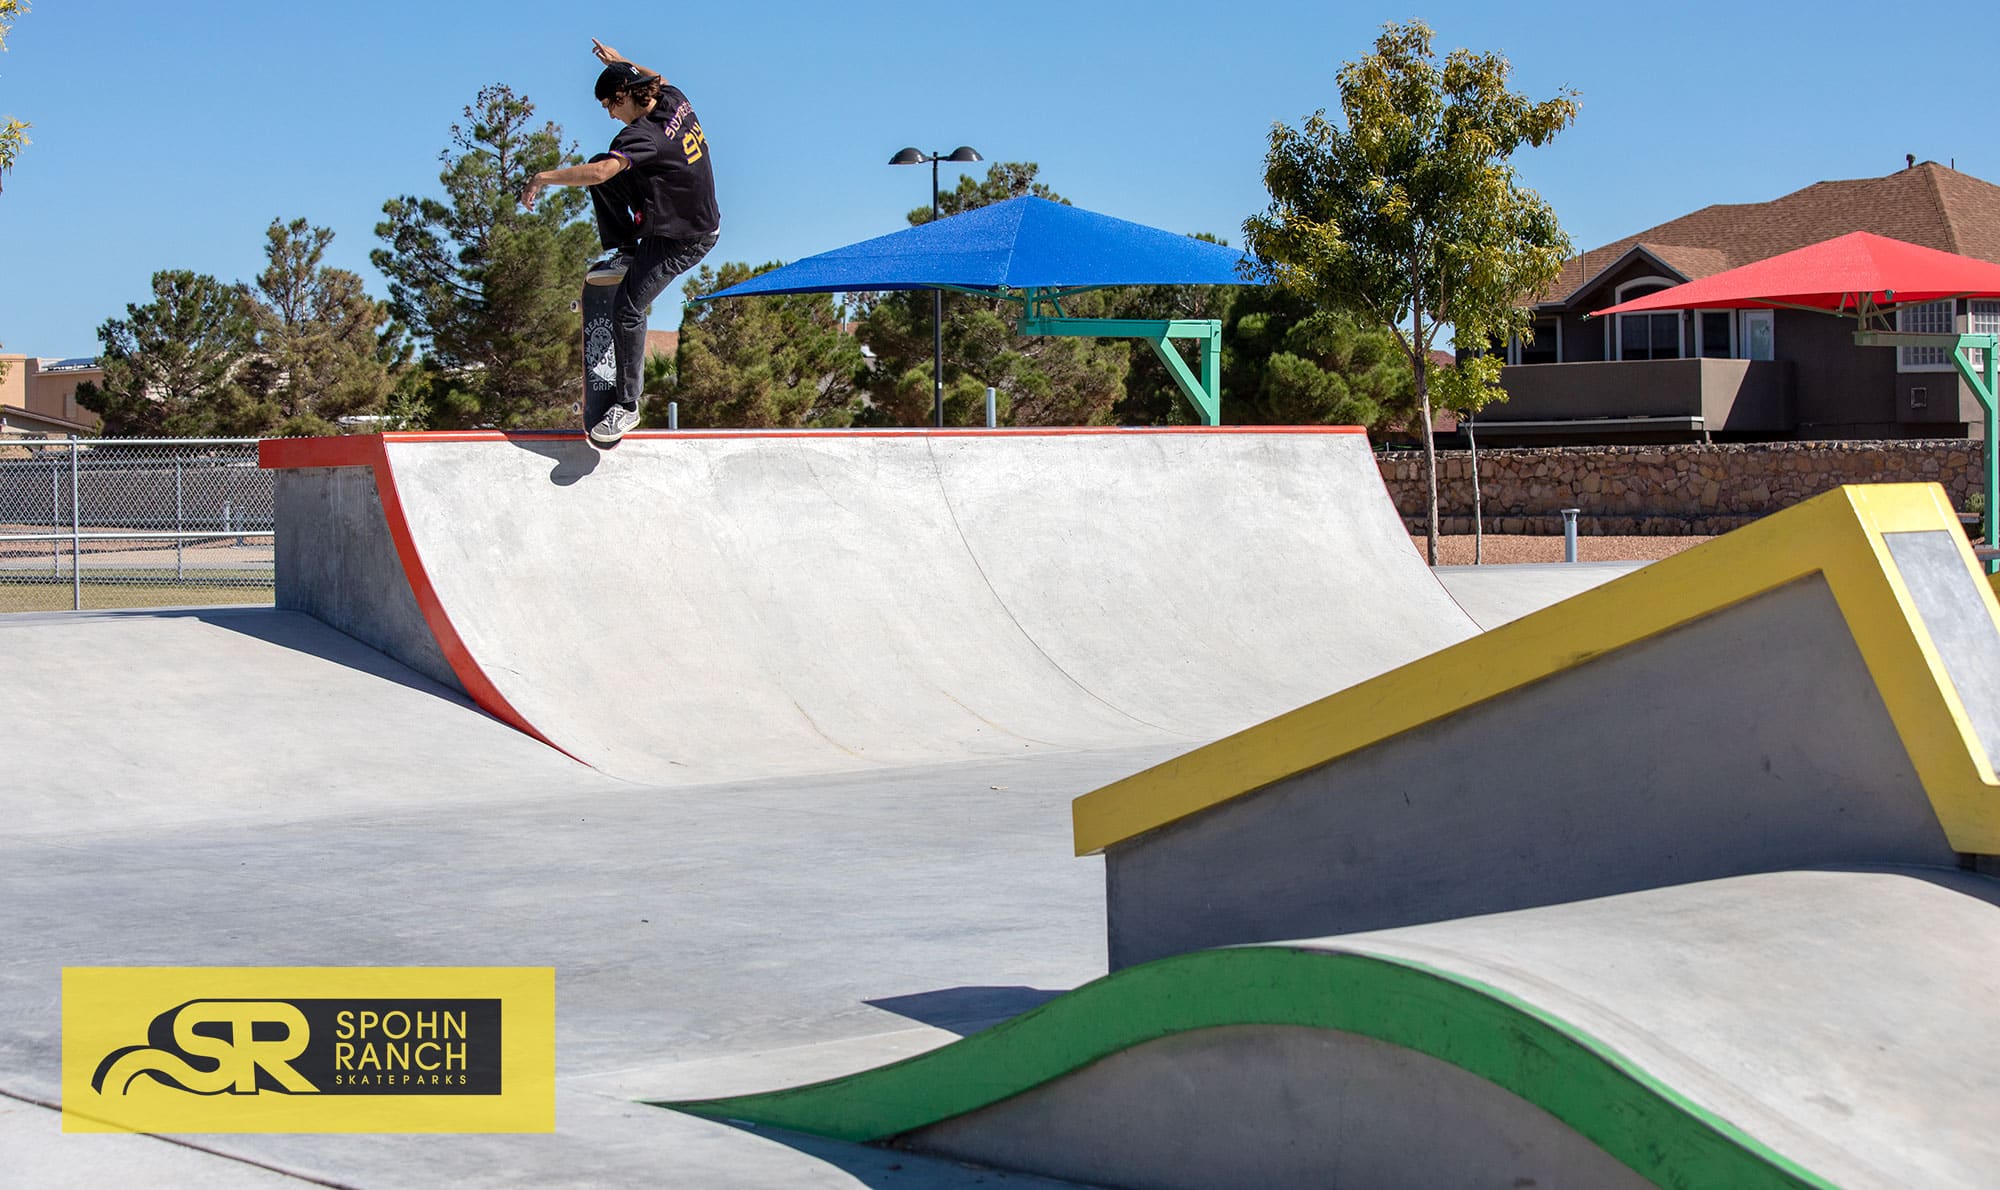 Blunt to fakie at the Horizon City Skatepark in Texas built by Spohn Ranch